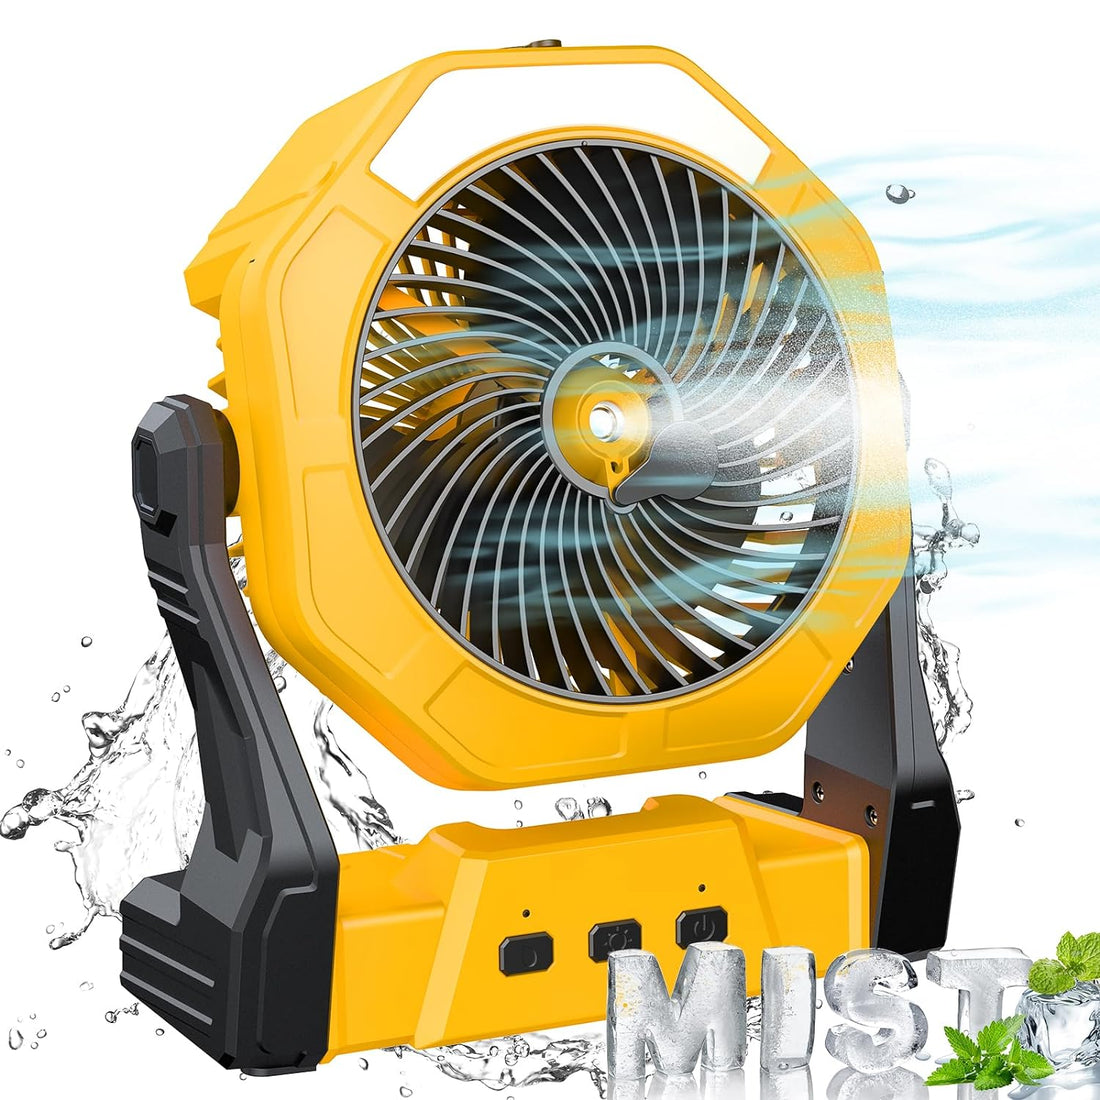 Camping Fan with Misting, 8-Inch 10000mAh Battery Operated Fan for Travel, Portable USB Rechargeable Misting Fan with 250mL Tank, Hanging, LED light, for Indoor/Outdoor, Office, BBQ, Fishing, Picnic